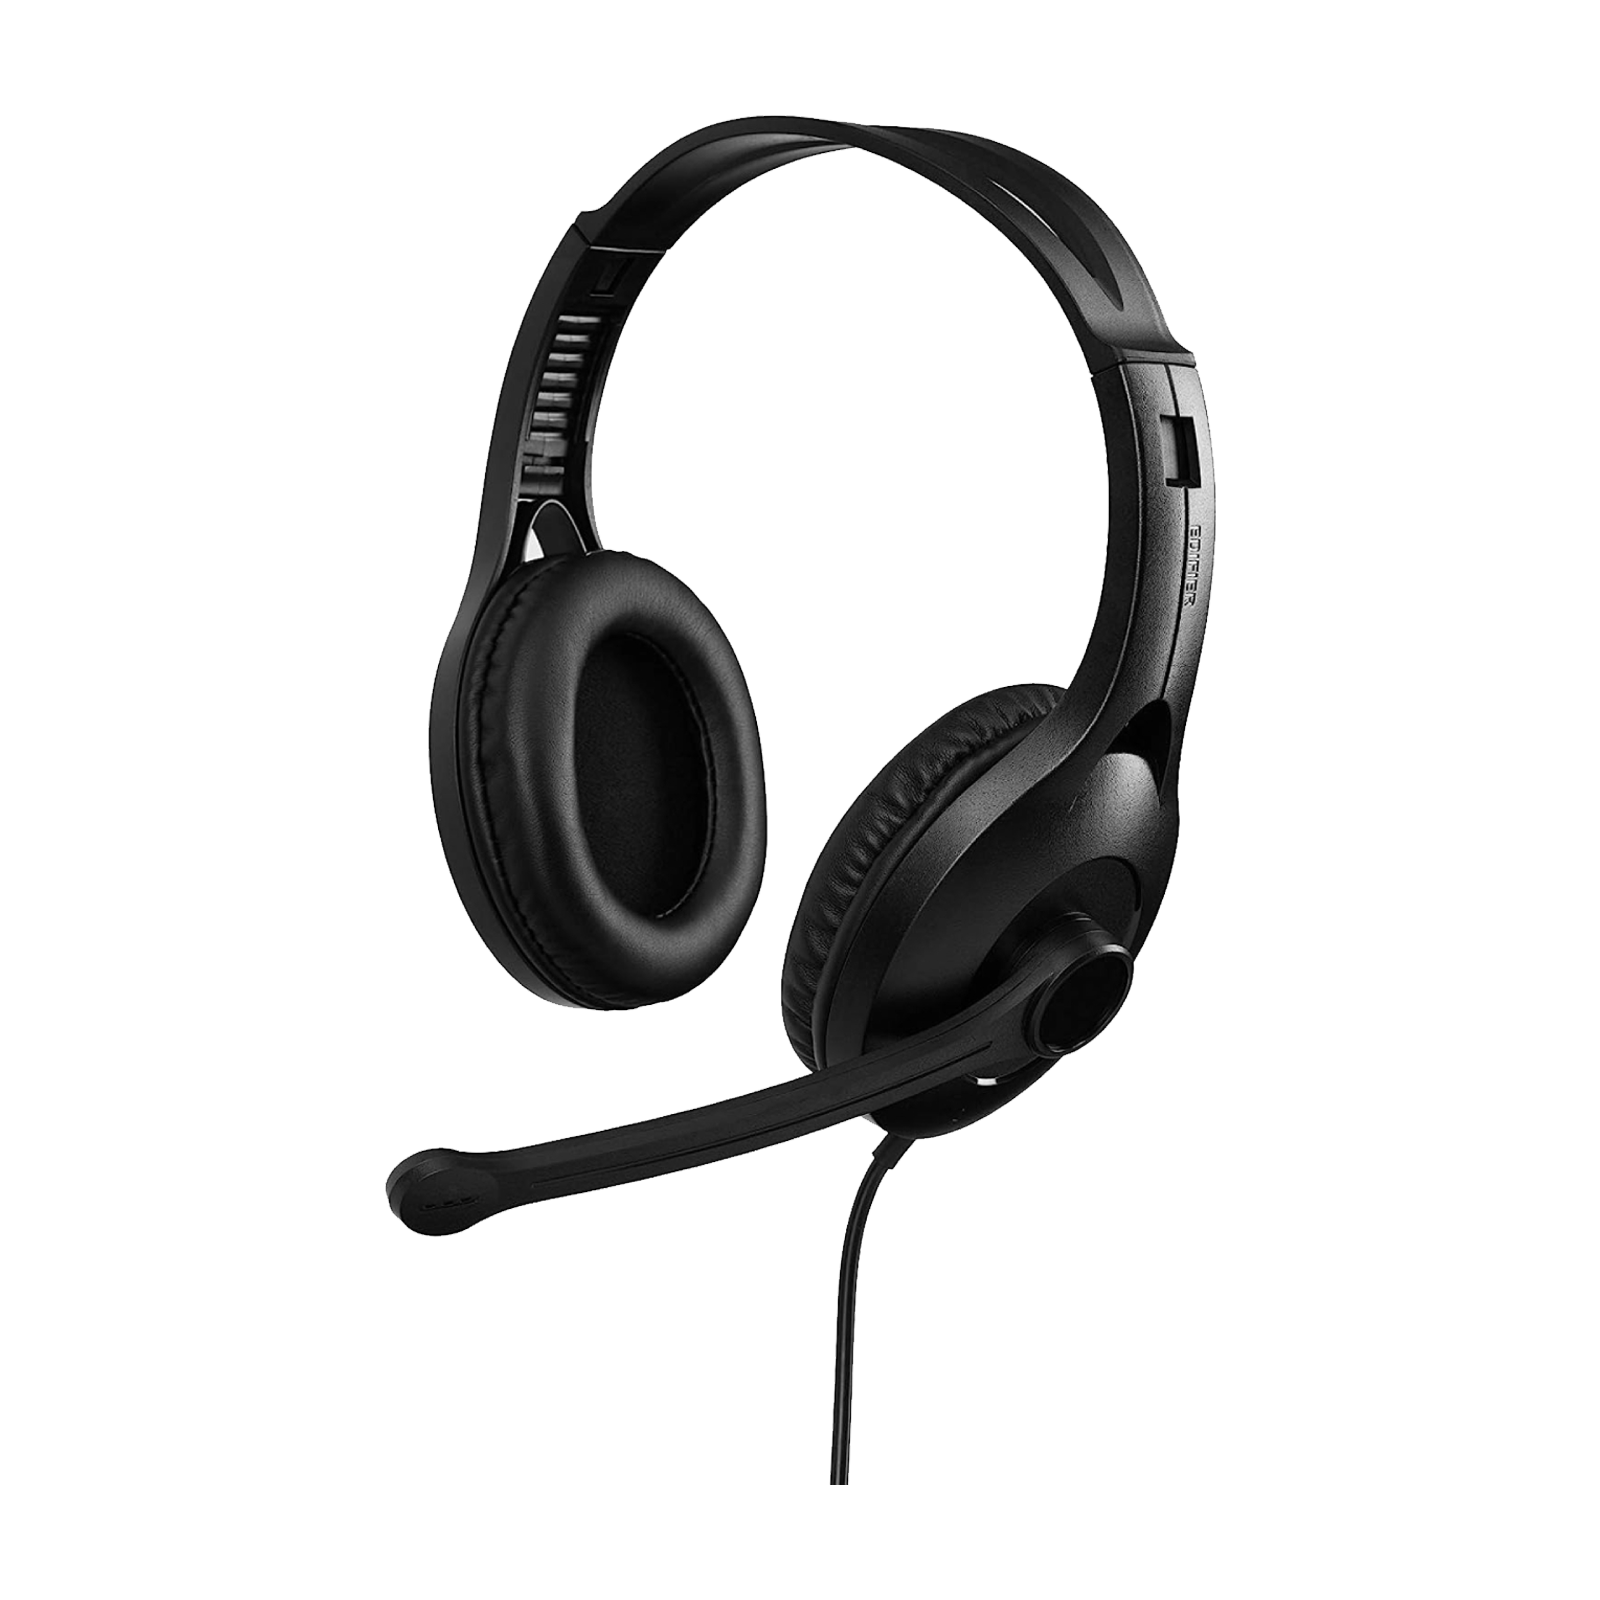 K800 USB Computer Headset with Microphone